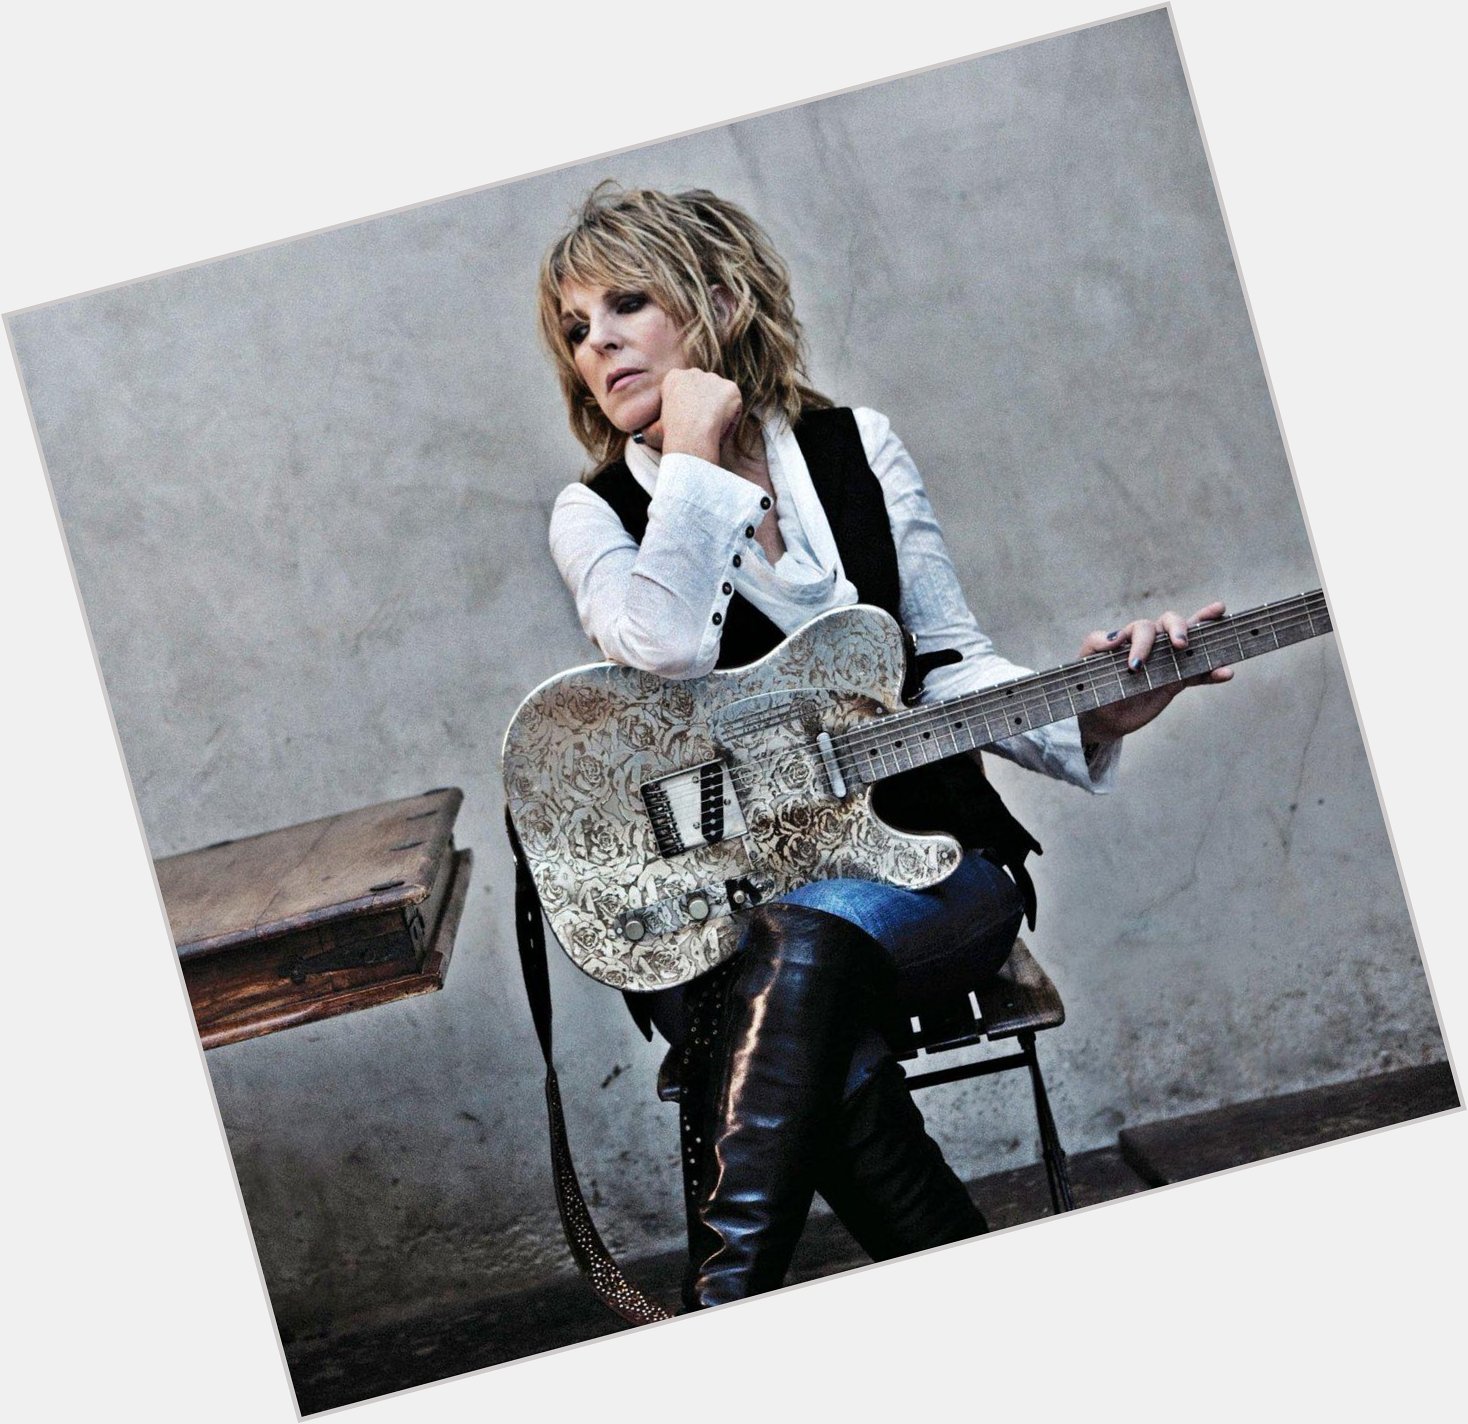 Wishing a very happy birthday to Lucinda Williams ( Which LW record are you spinning today? 